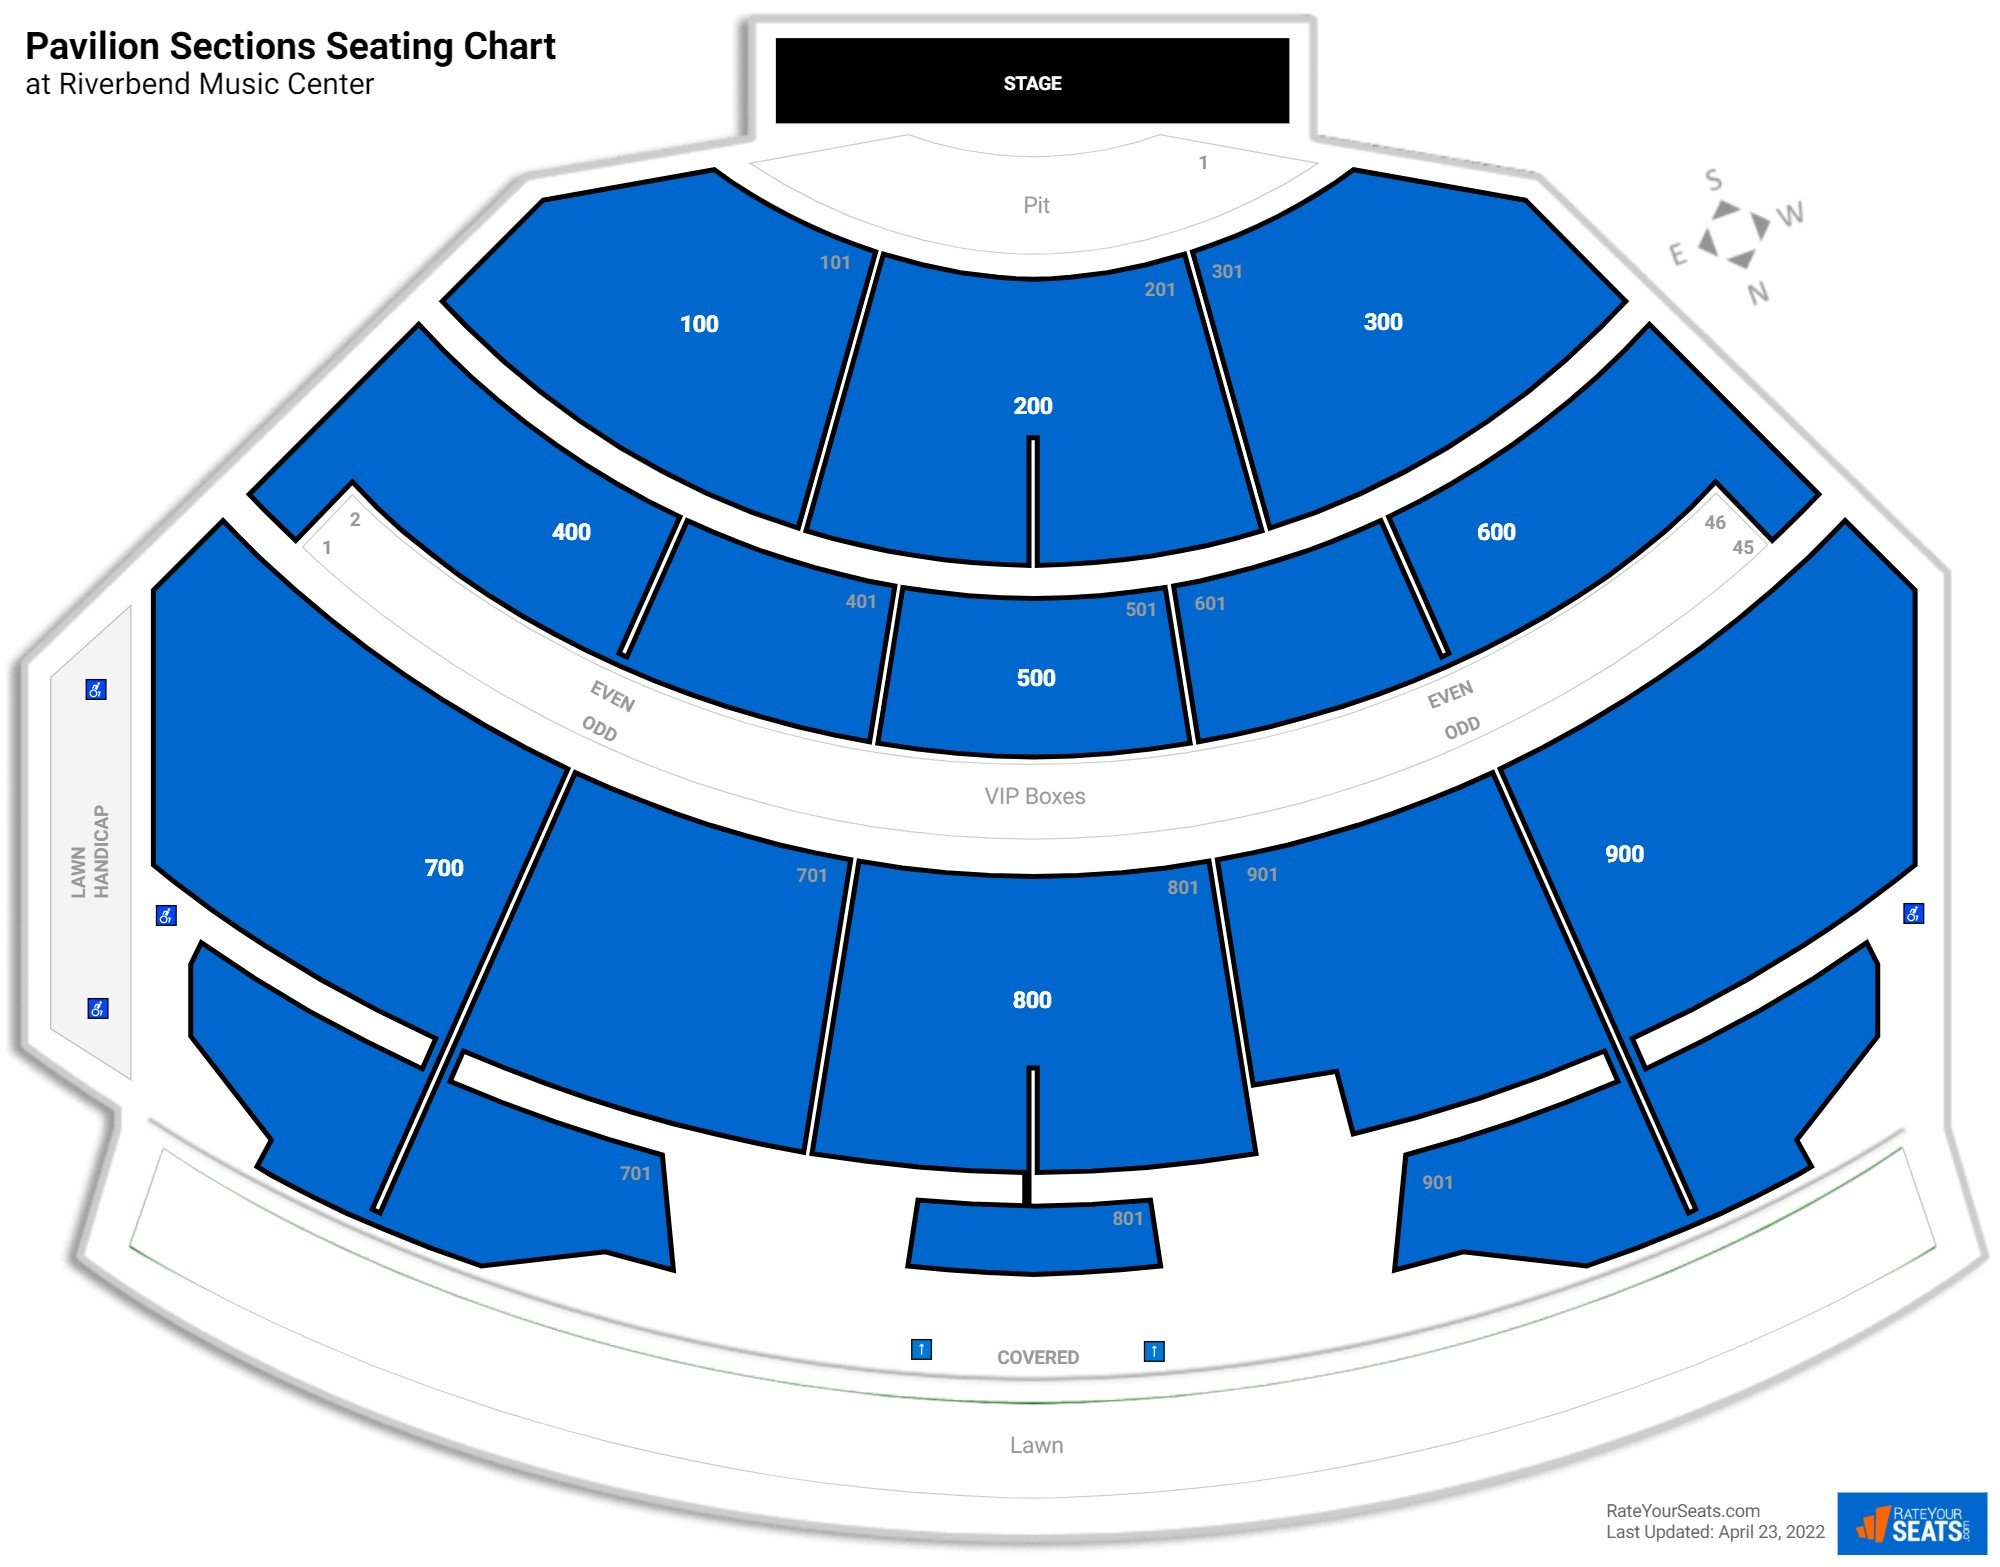 Concert Pavilion Sections Seating Chart at Riverbend Music Center